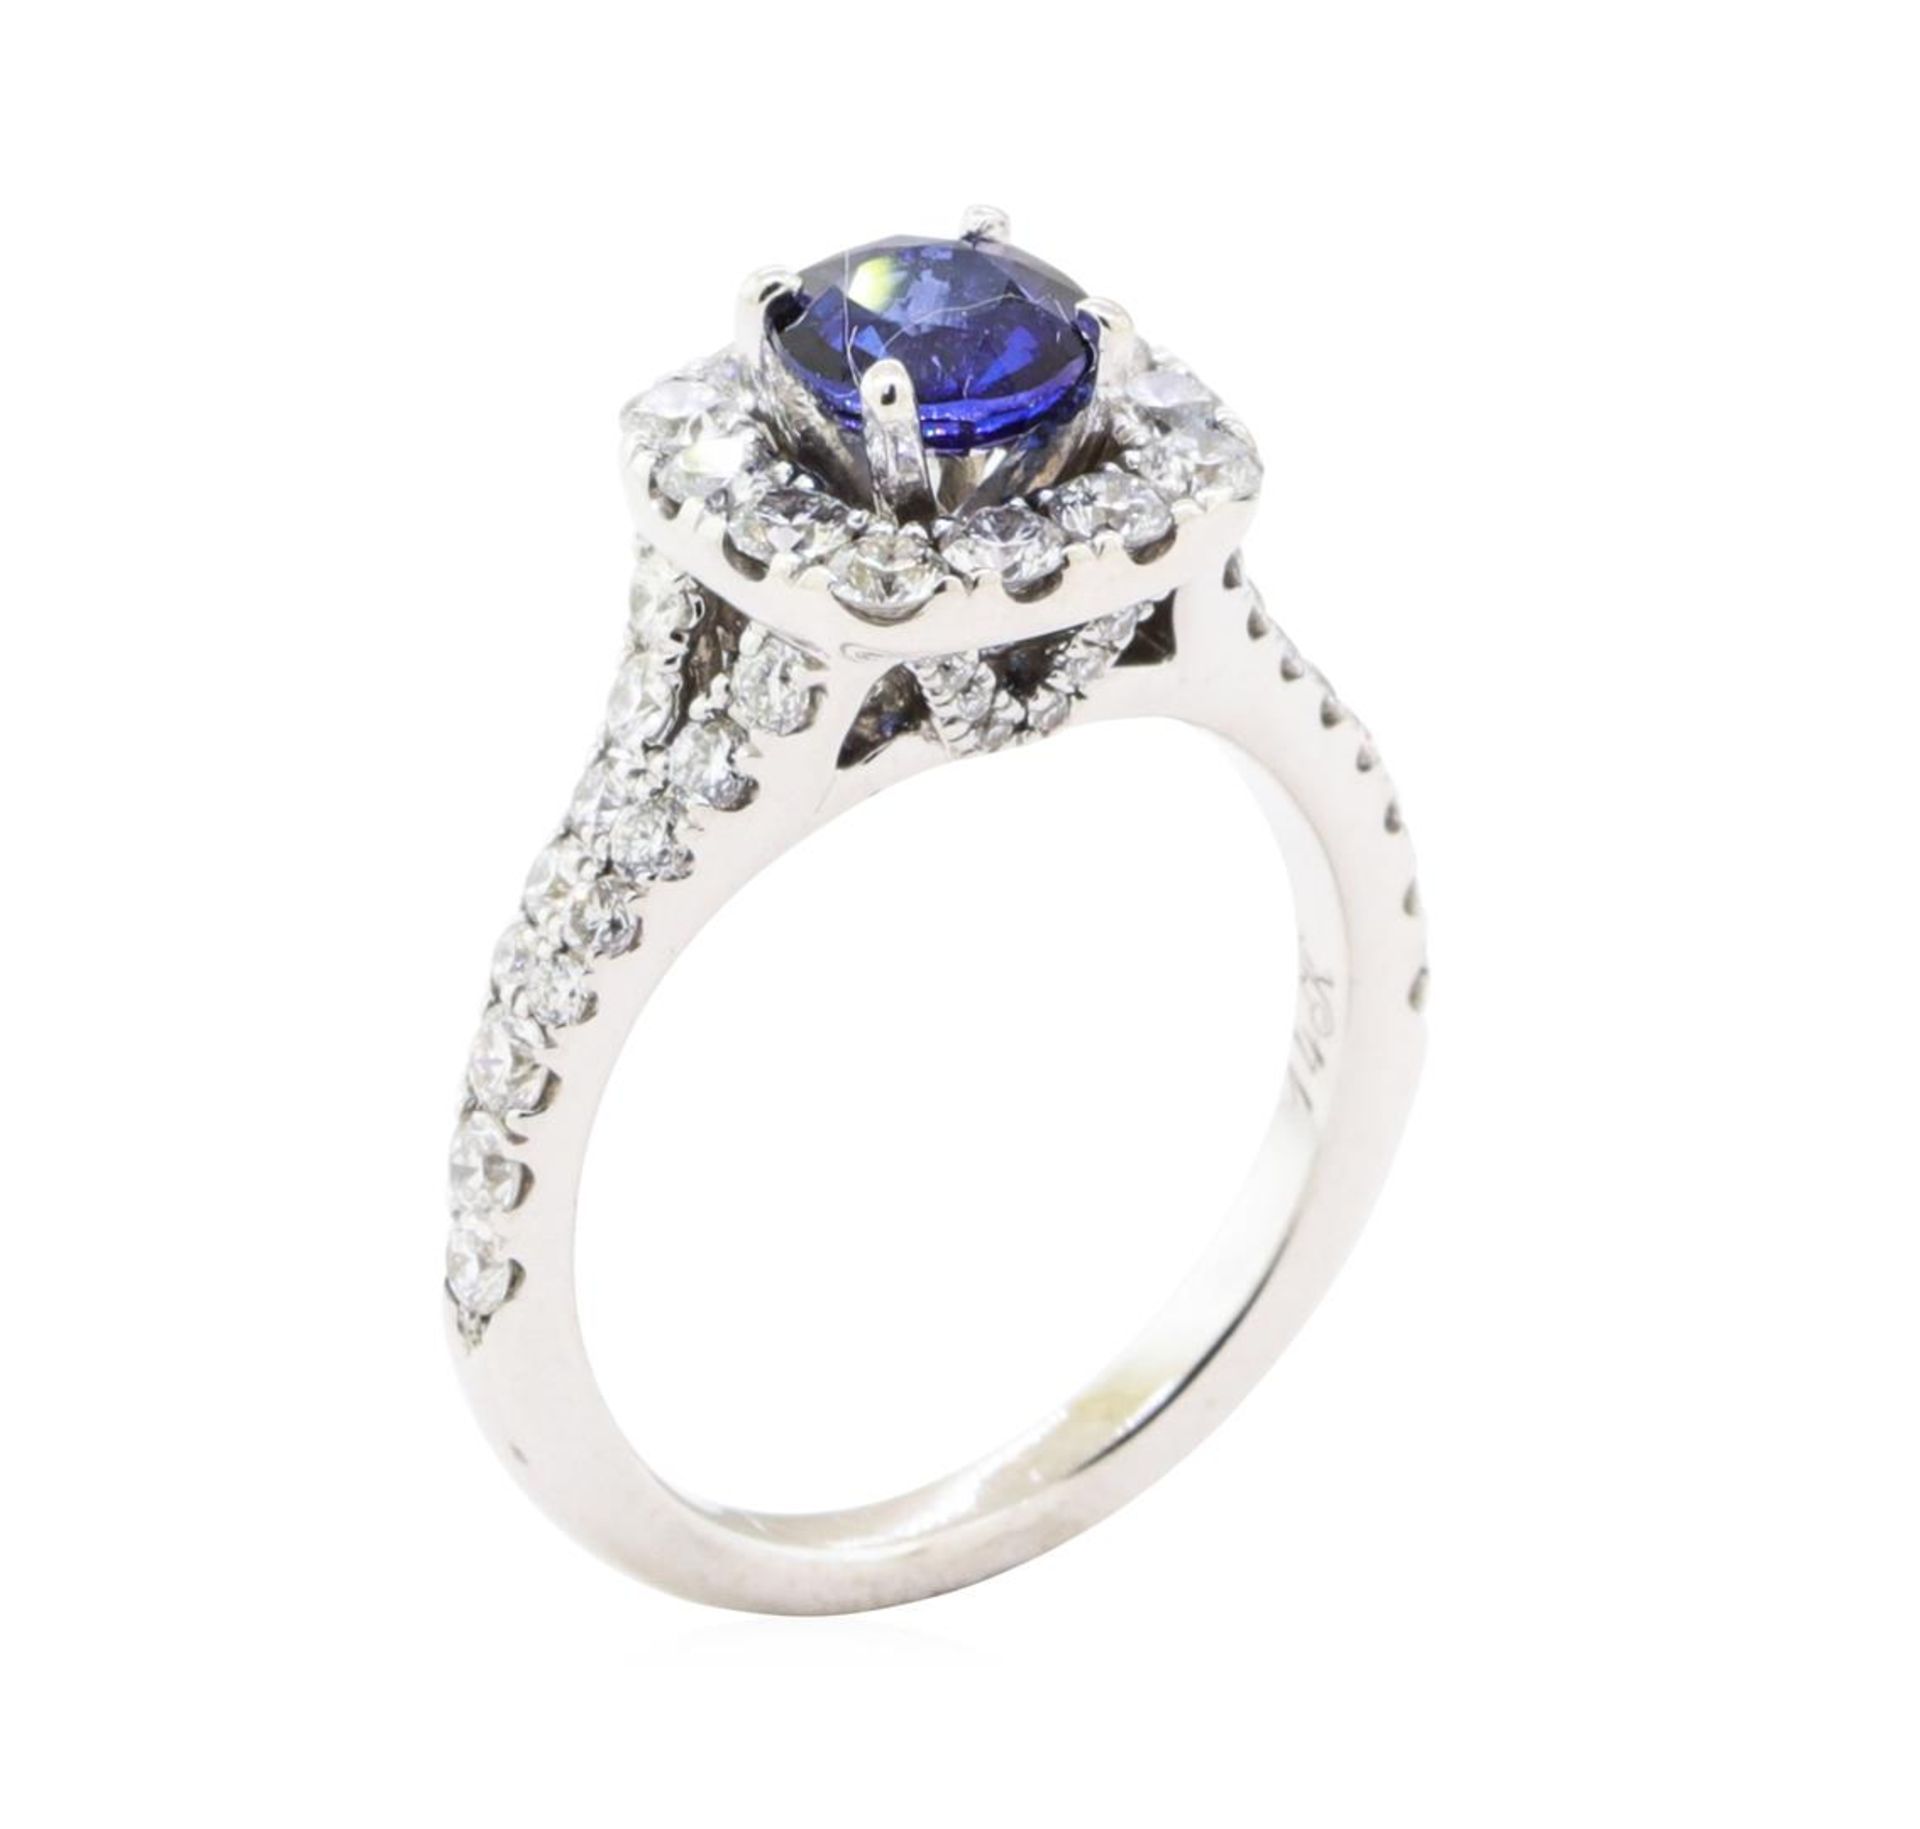 2.20 ctw Sapphire And Diamond Ring - 14KT White Gold - Image 4 of 6